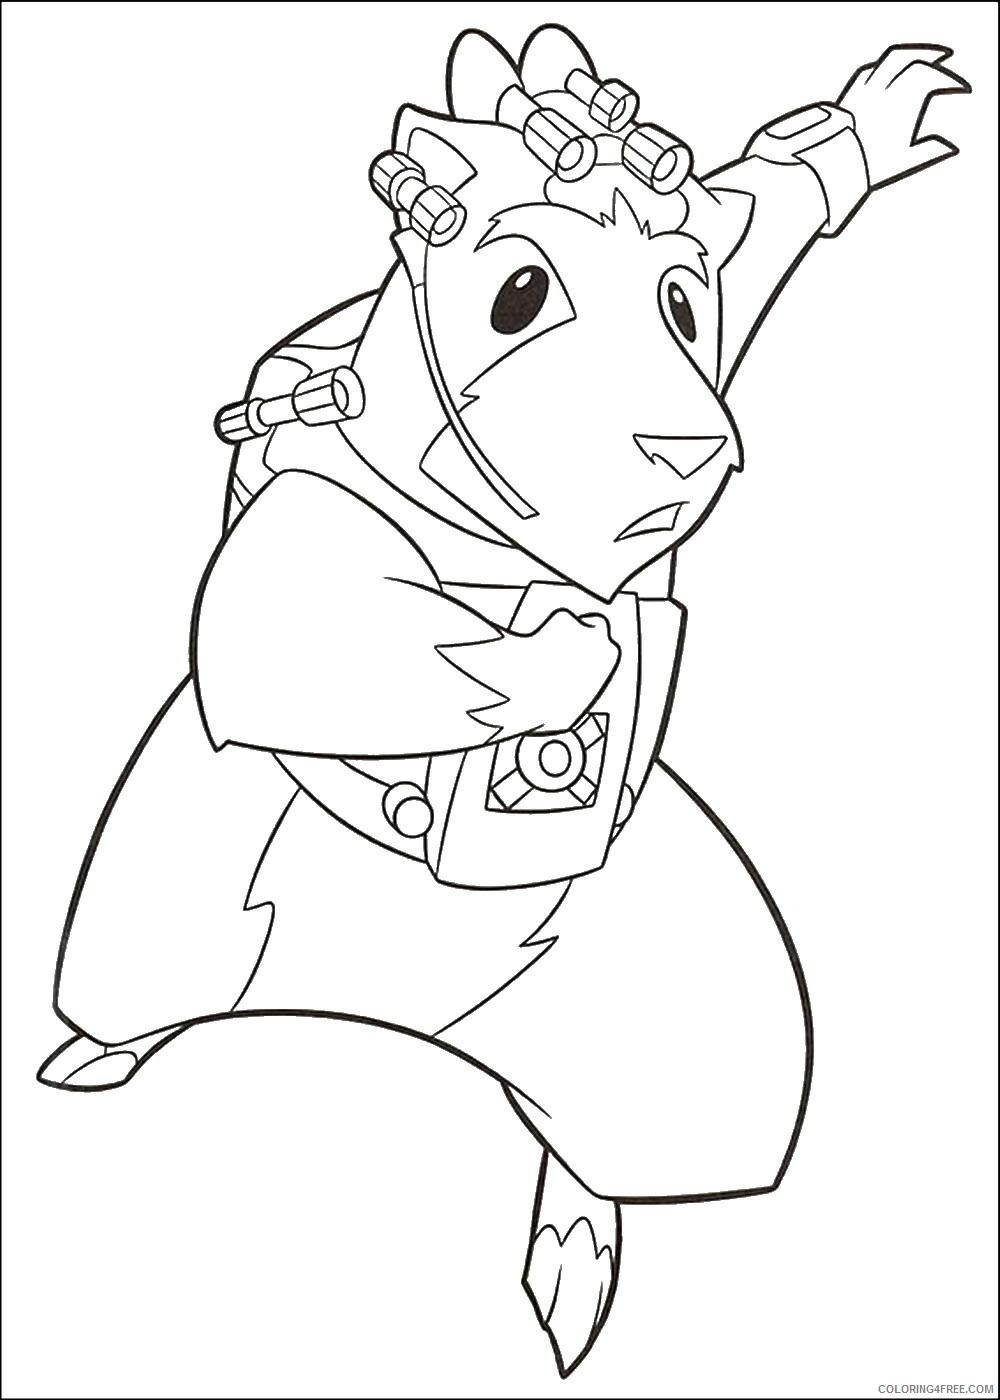 G Force Coloring Pages TV Film g_force_cl_05 Printable 2020 03268 Coloring4free